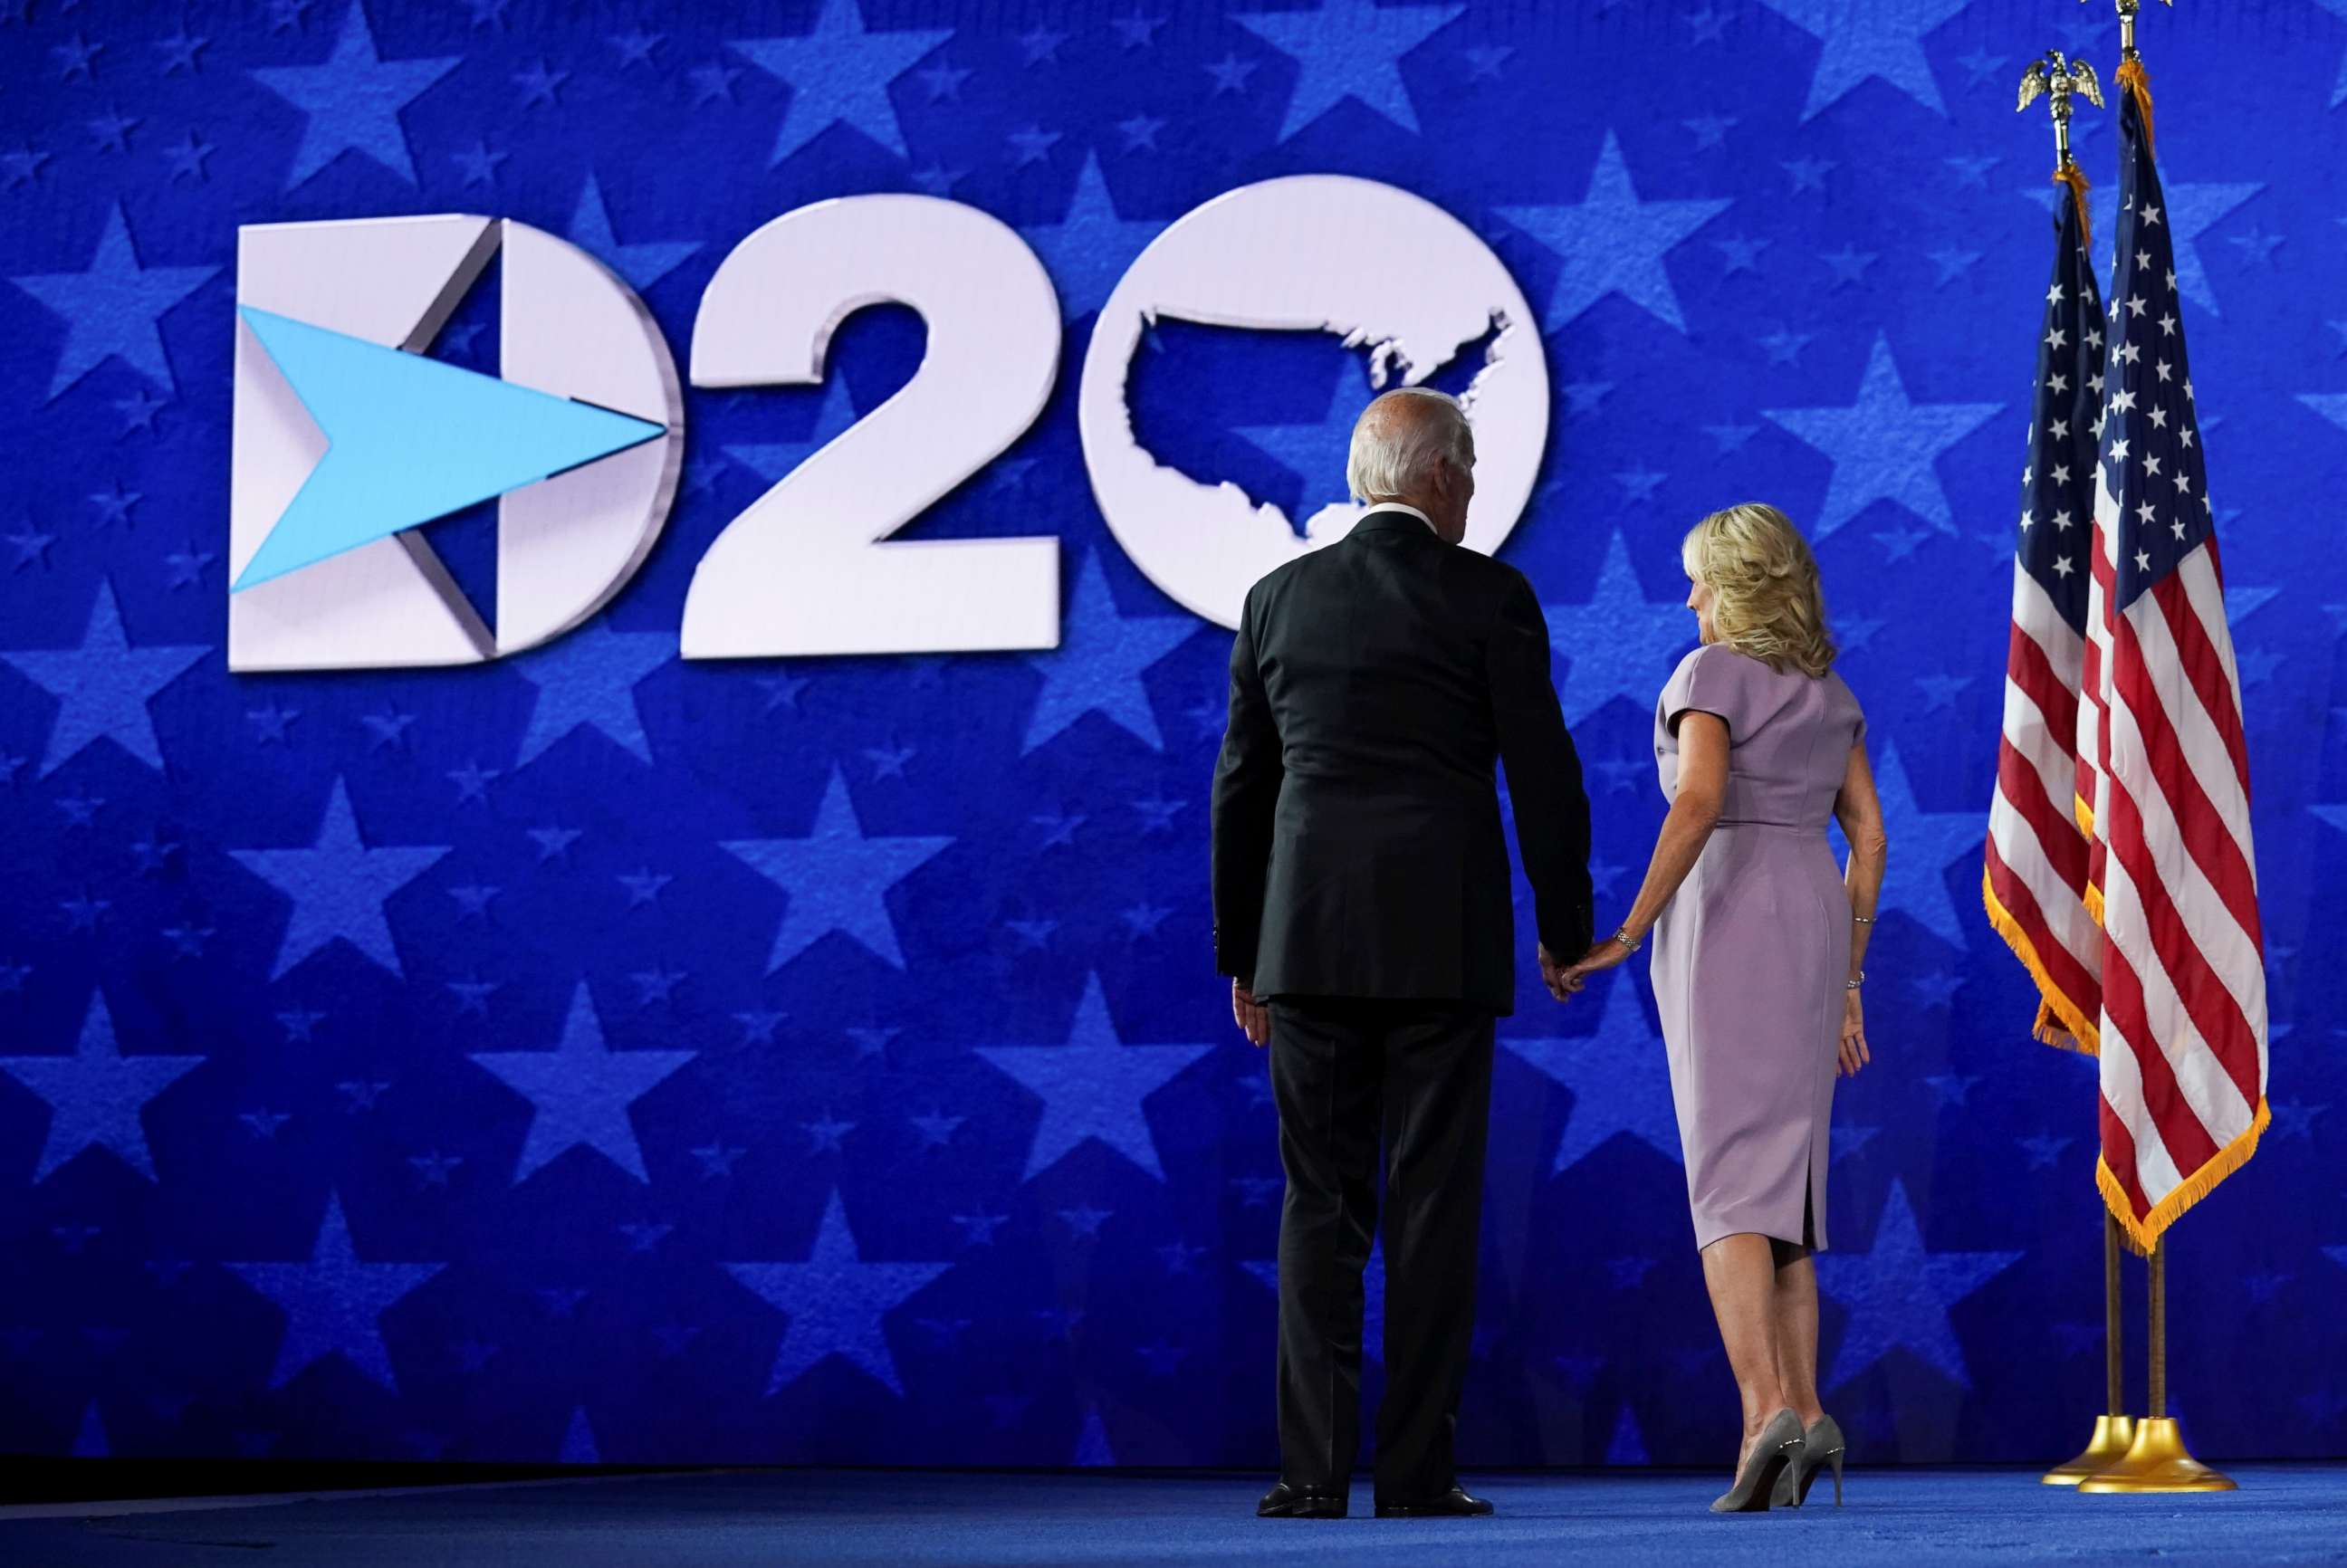 PHOTO: Democratic presidential candidate Joe Biden and his wife Dr. Jill Biden leave the stage following his acceptance speech on the final night of the 2020 Democratic National Convention in Wilmington, Del., Aug. 20, 2020.